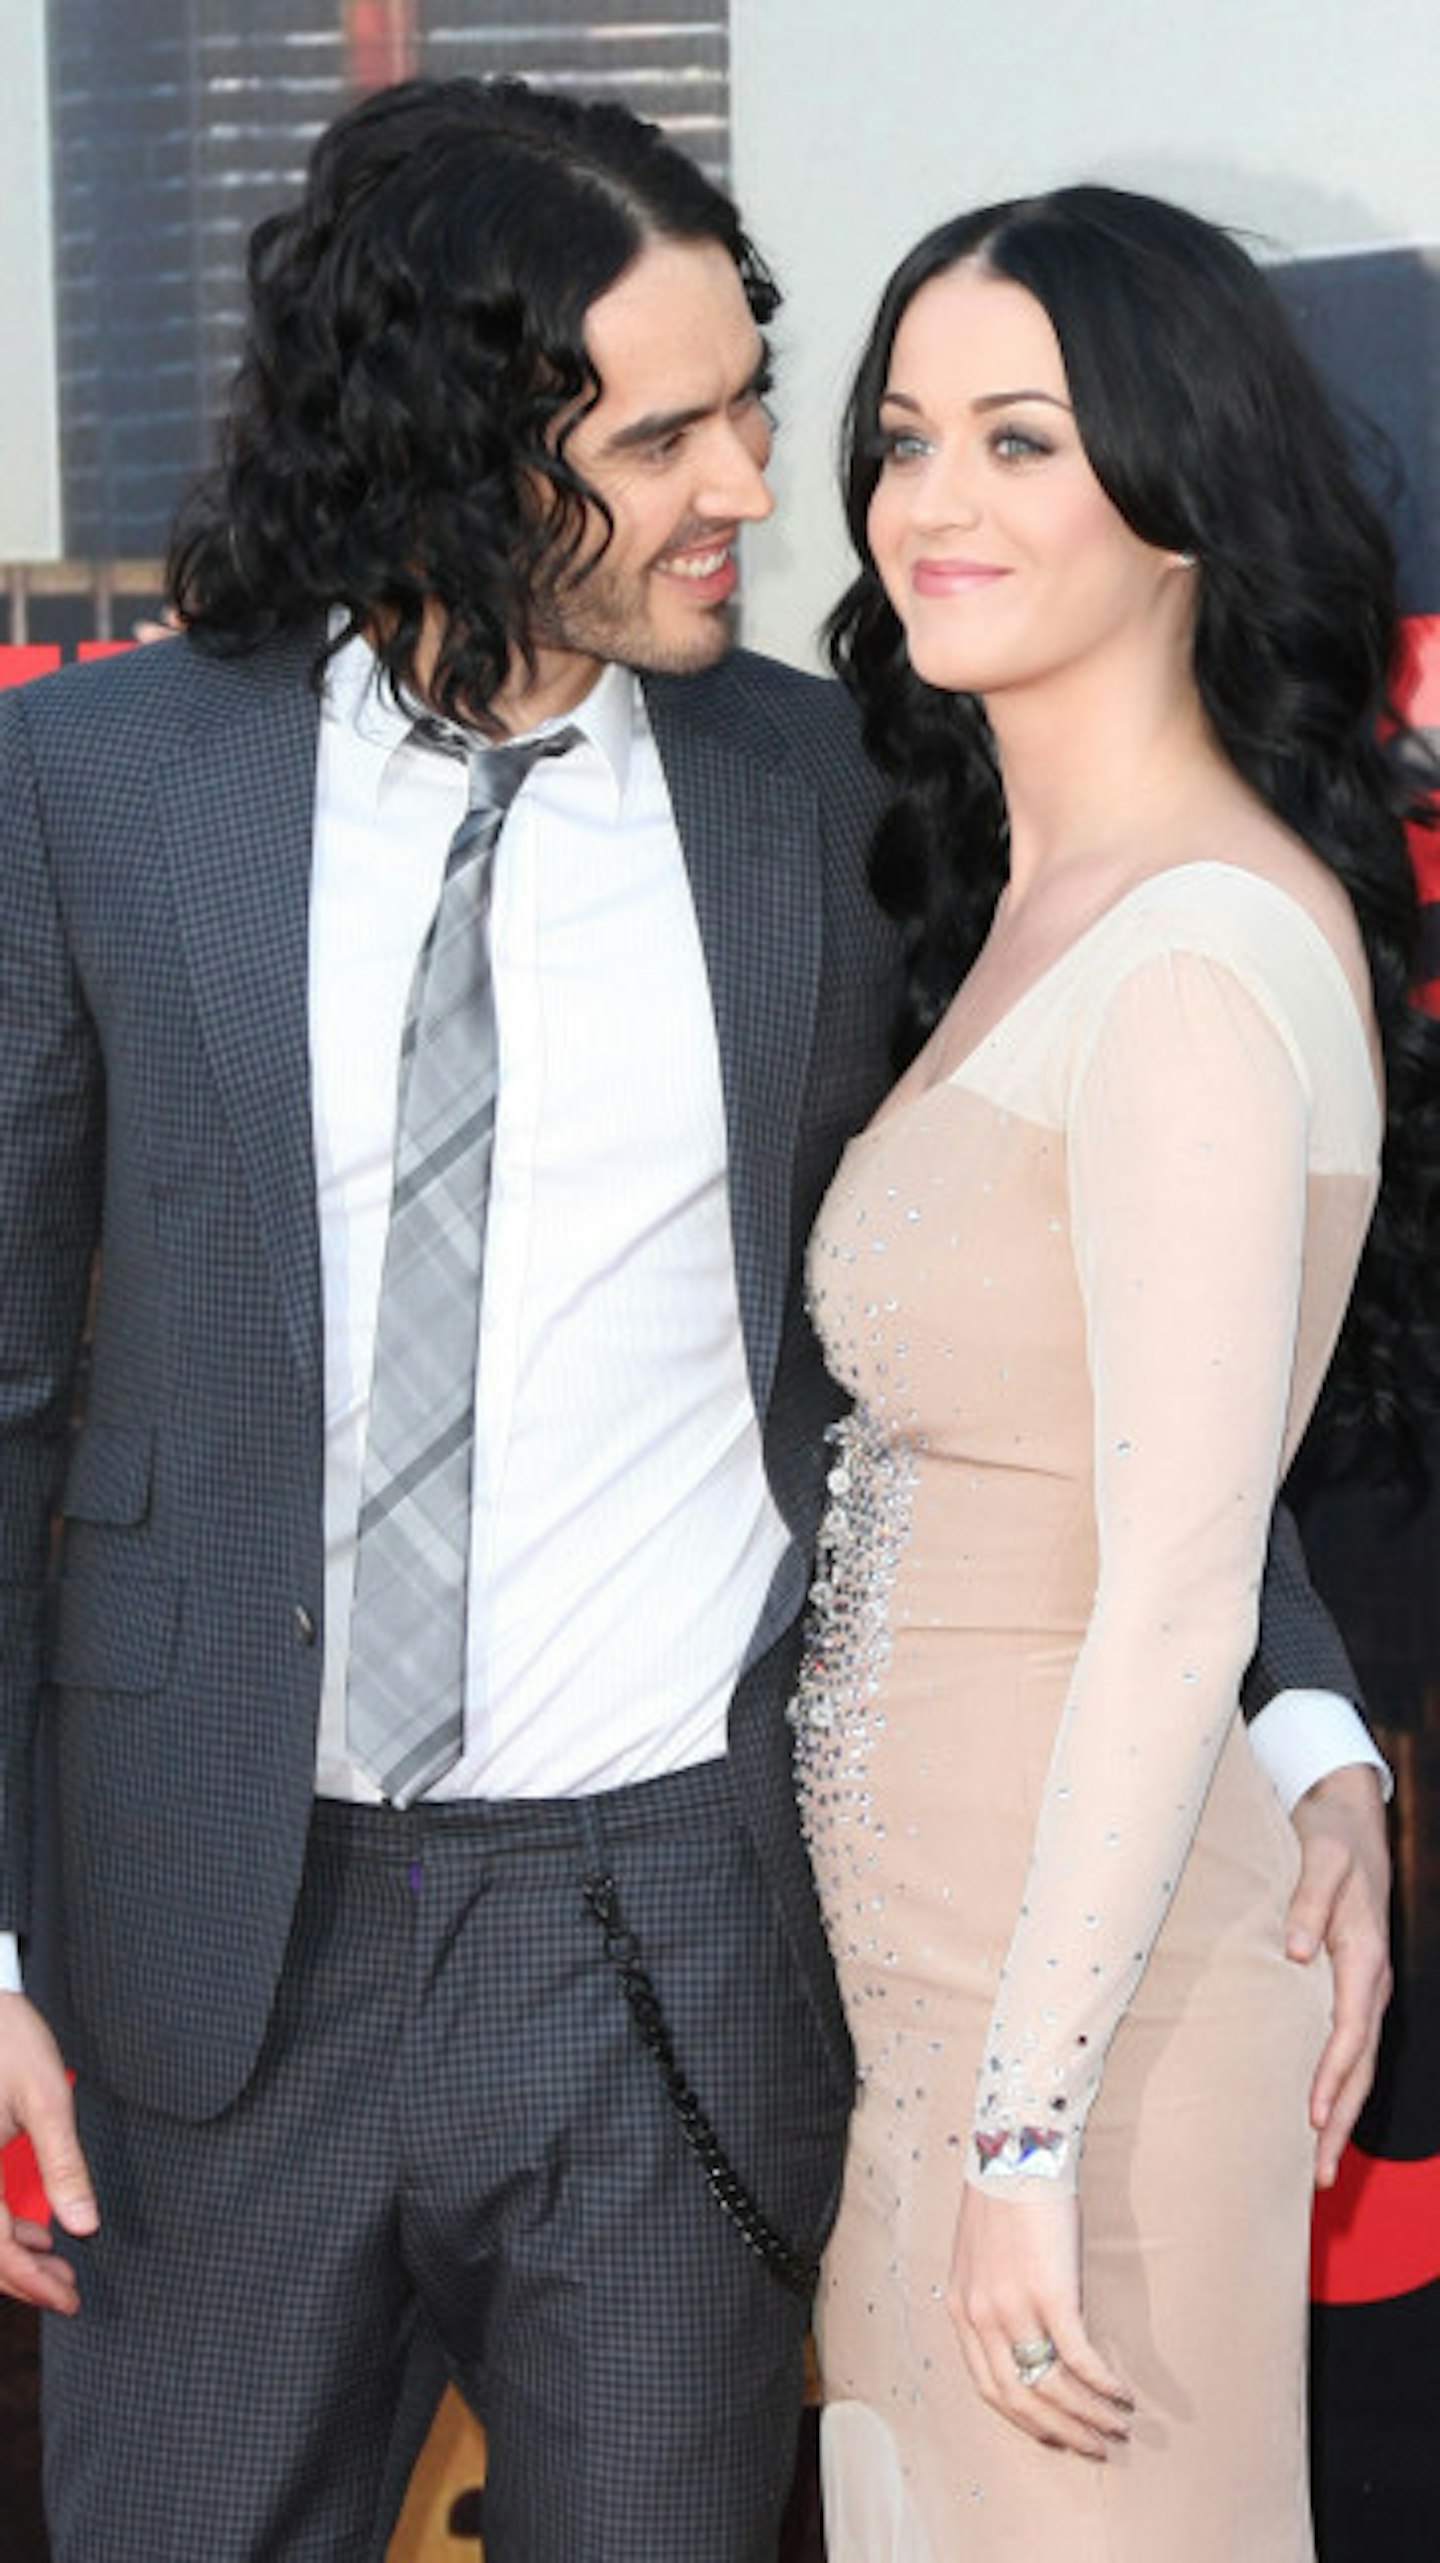 Russell divorced ex-wife Katy Perry in 2012